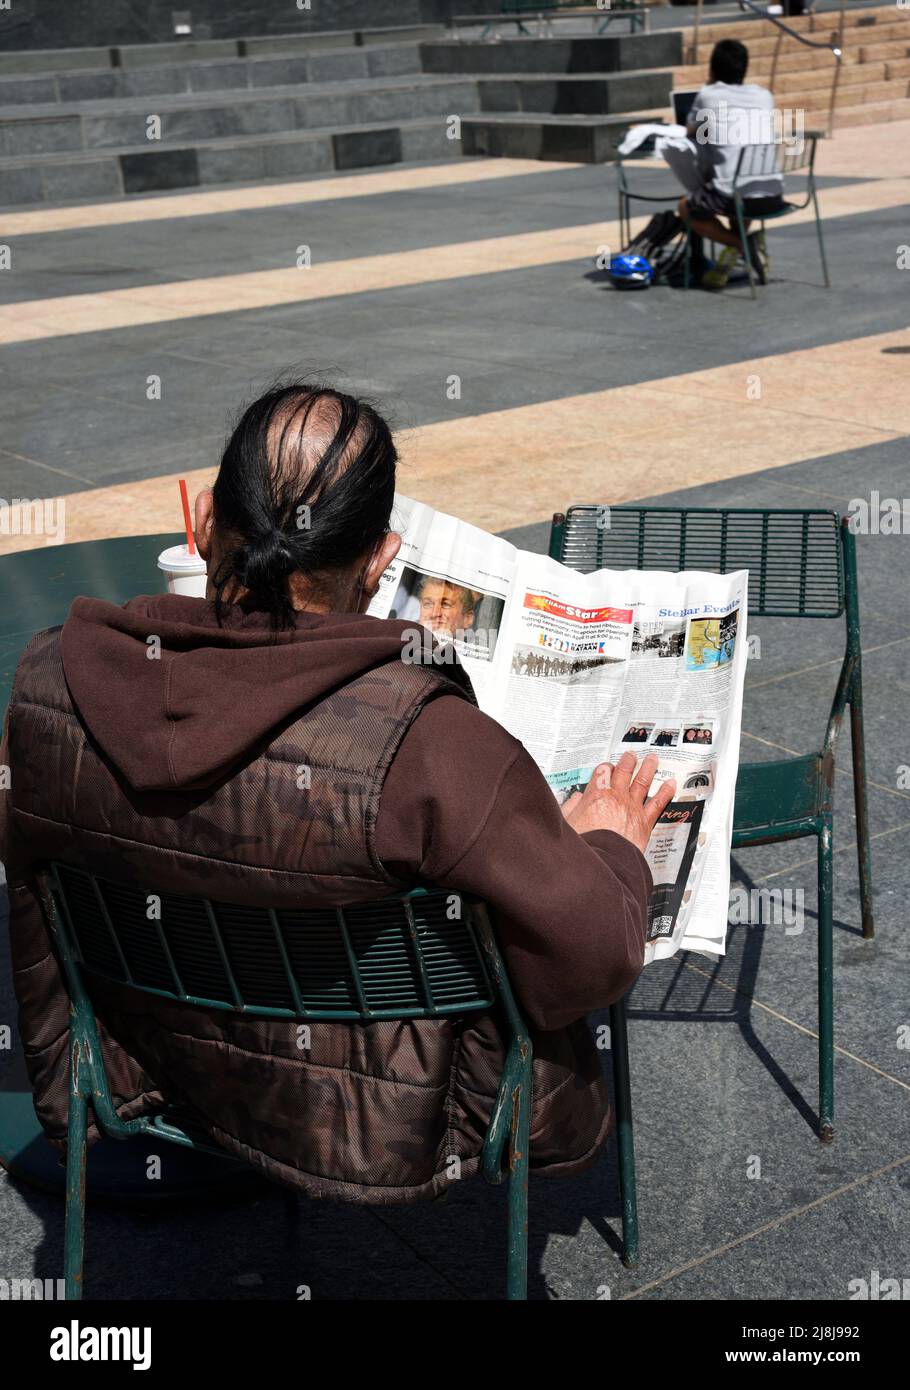 A man reads a newspaper as he relaxes in Union Square in San Francisco, California. Stock Photo